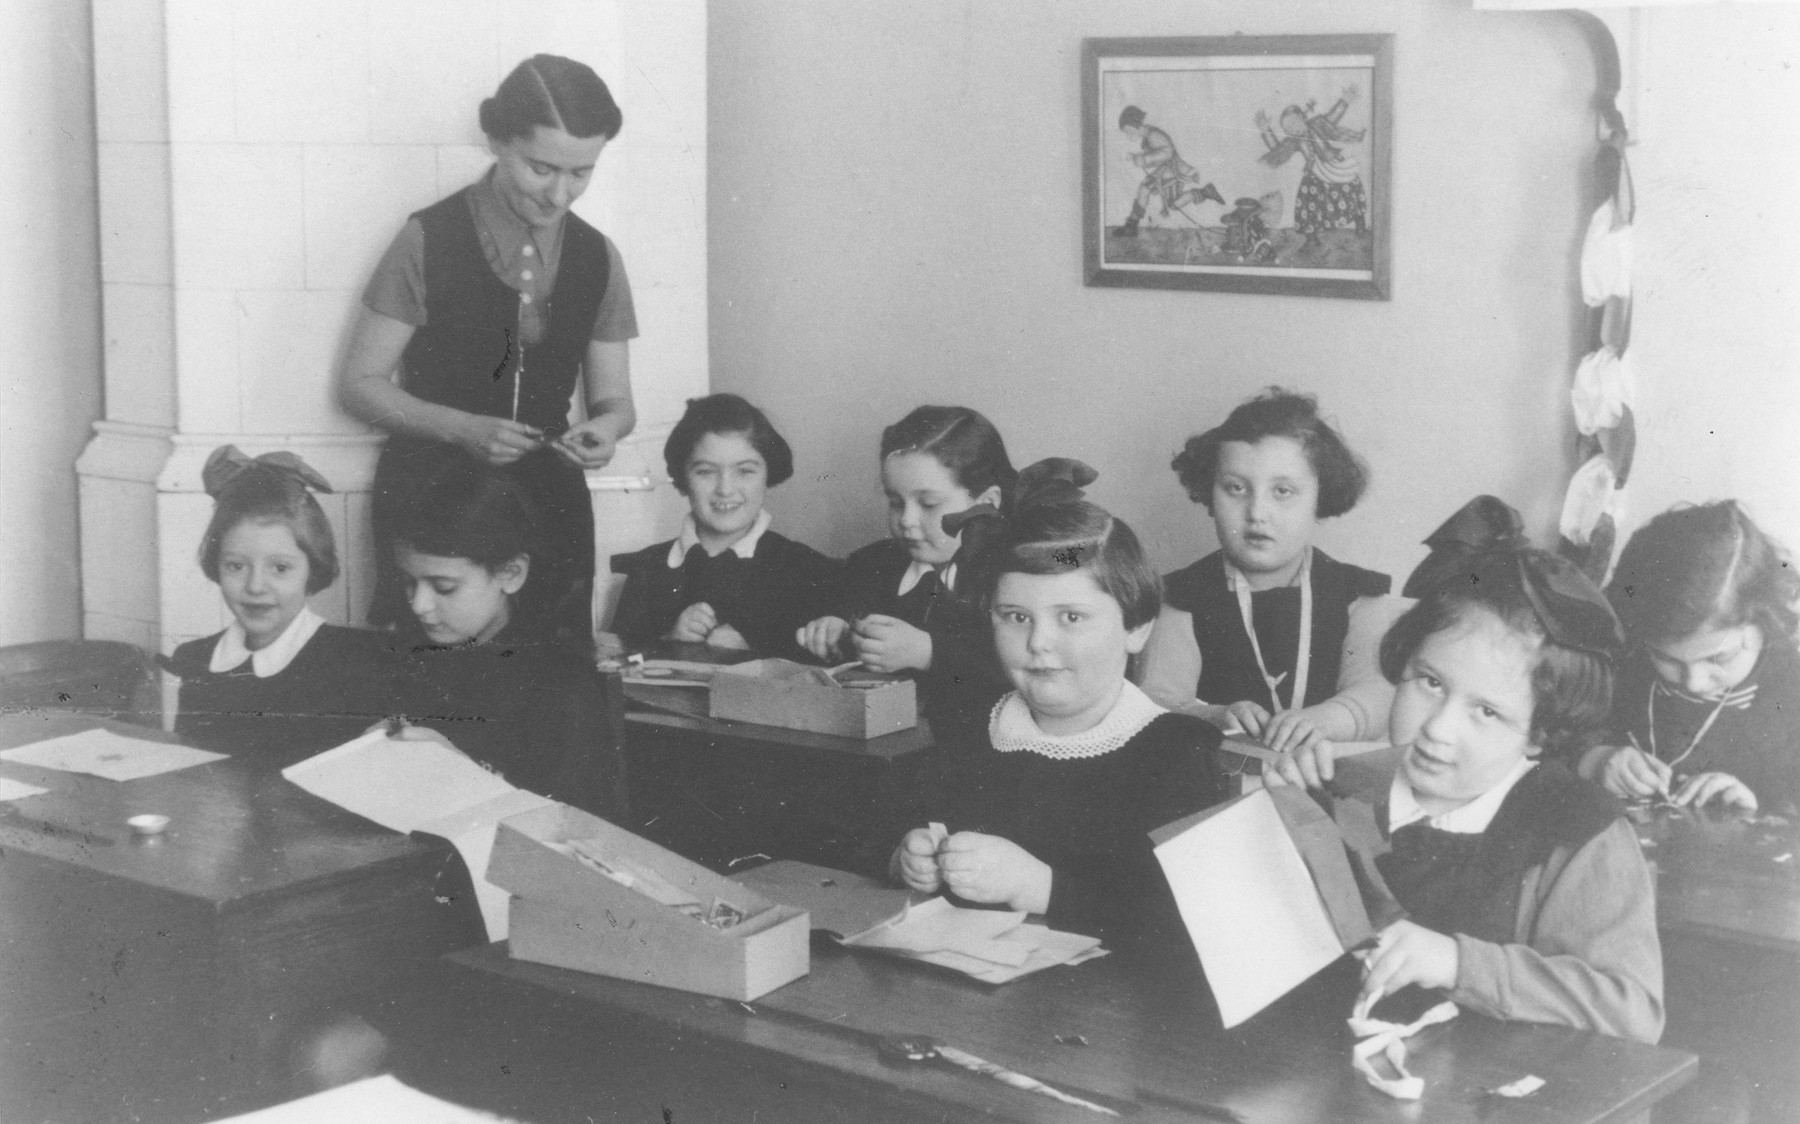 Pupils in the second grade work in their classroom at the Kalecka Jewish elementary school in Warsaw.

Among those pictured is Basia Berkowicz (front row, second from the left).